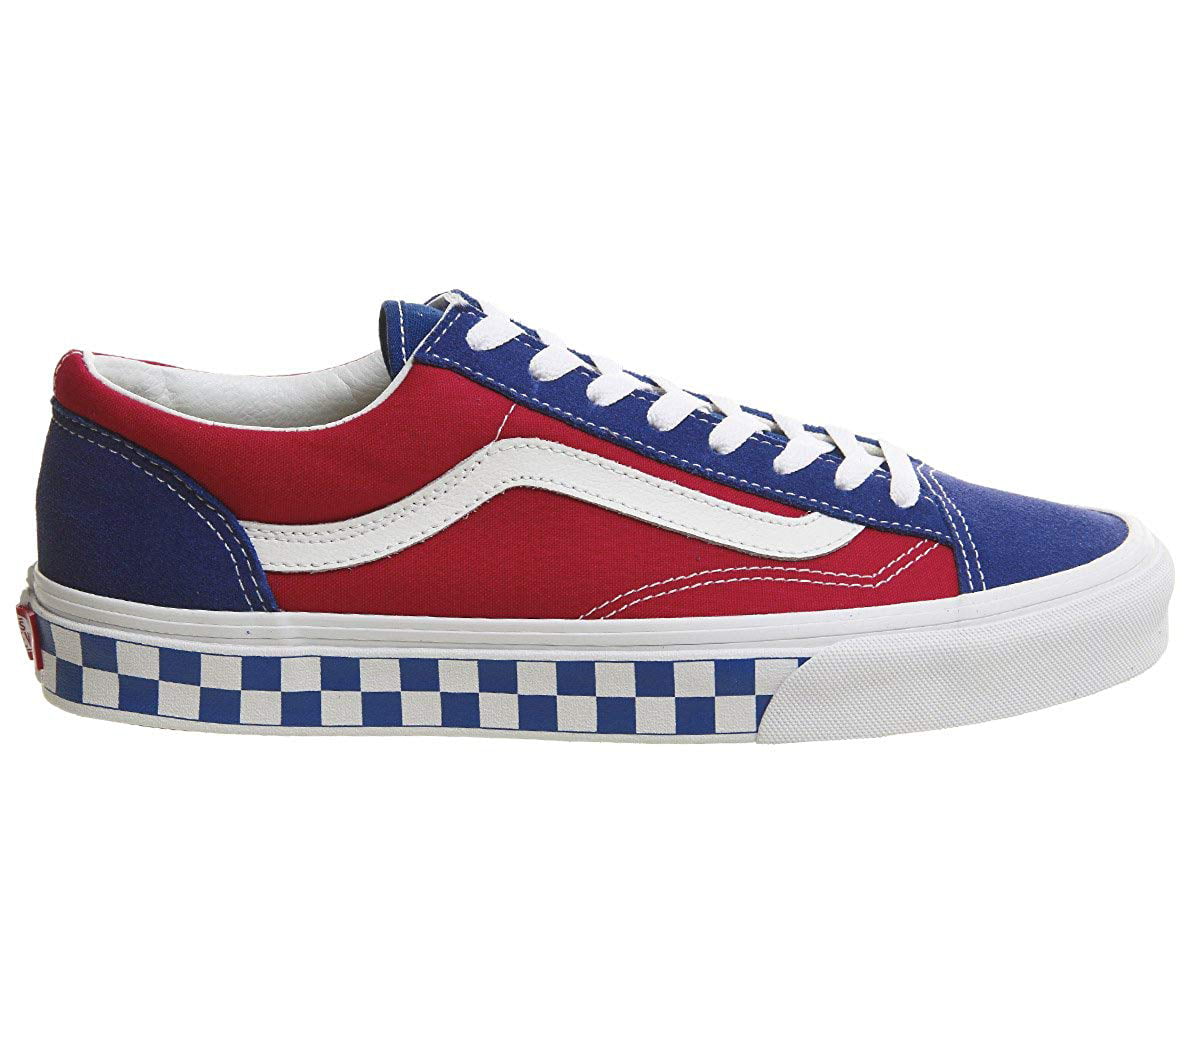 Feed on Clan cool vans old skool blue and red,yasserchemicals.com